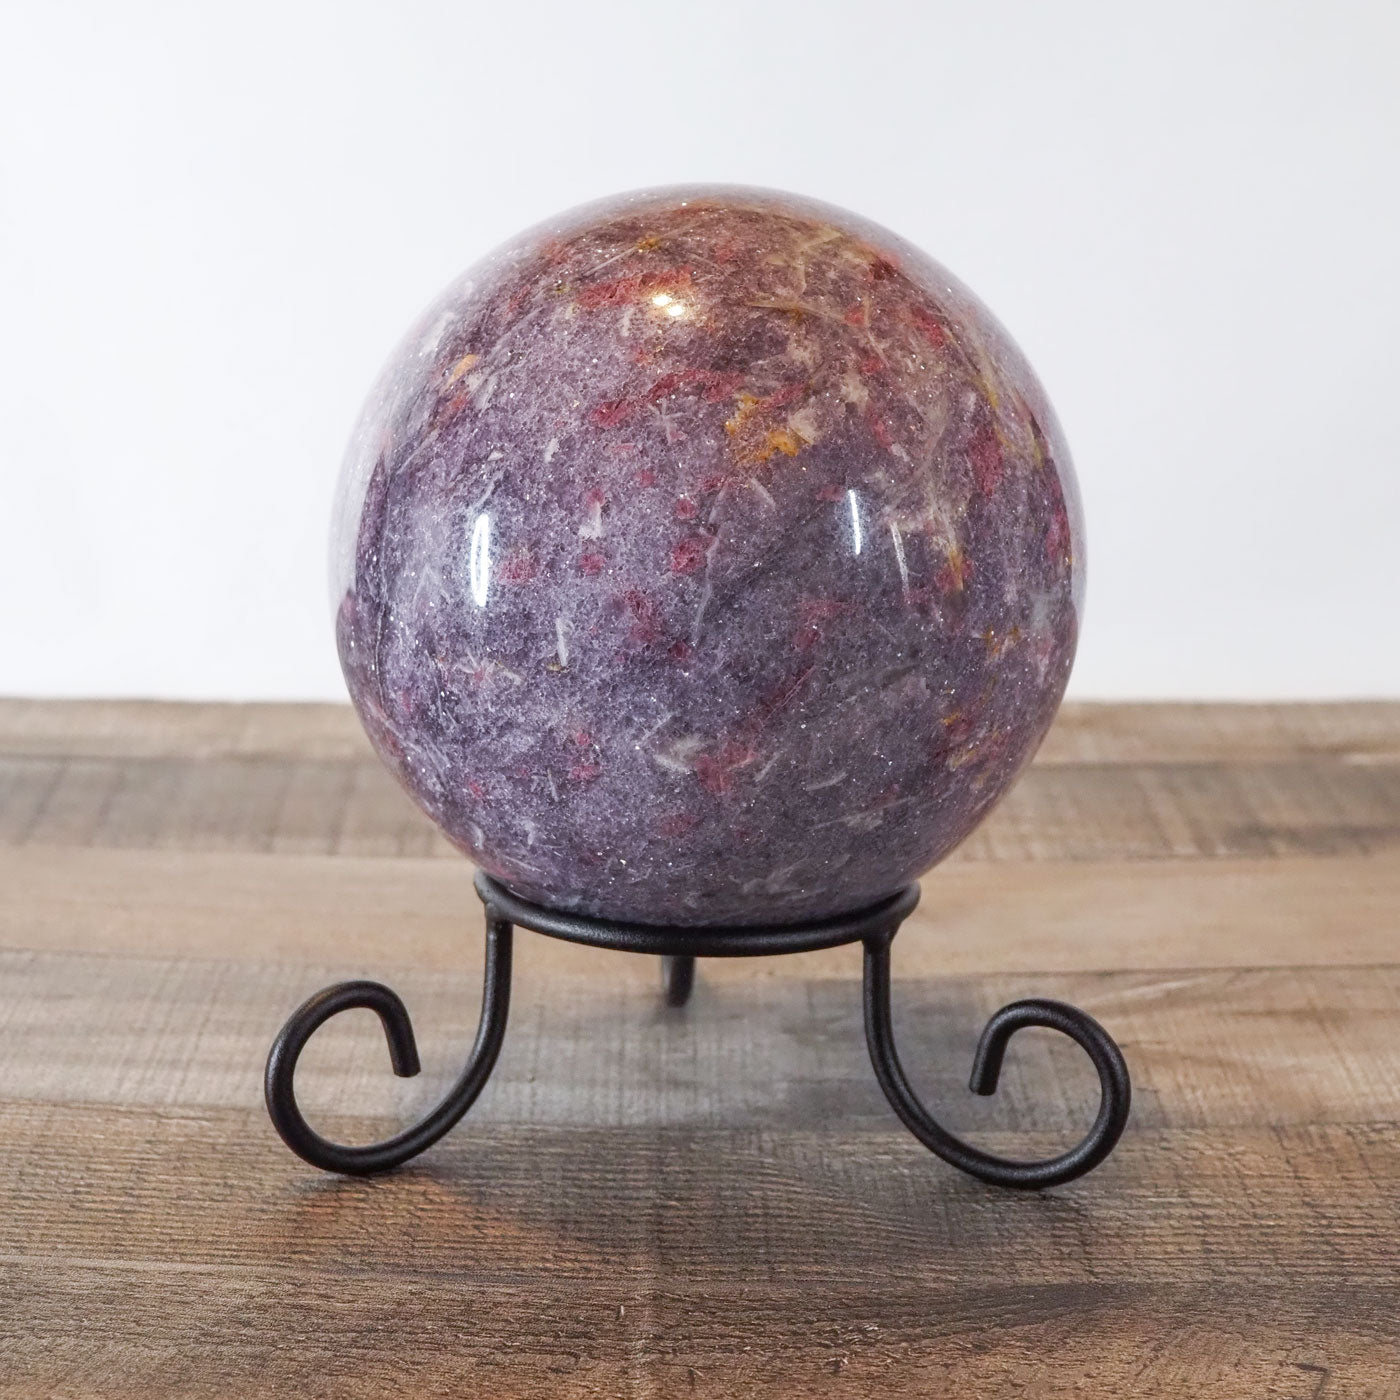 Large 10+ pound, 6" Sparkly Unicorn Stone Sphere sitting on its included metal stand